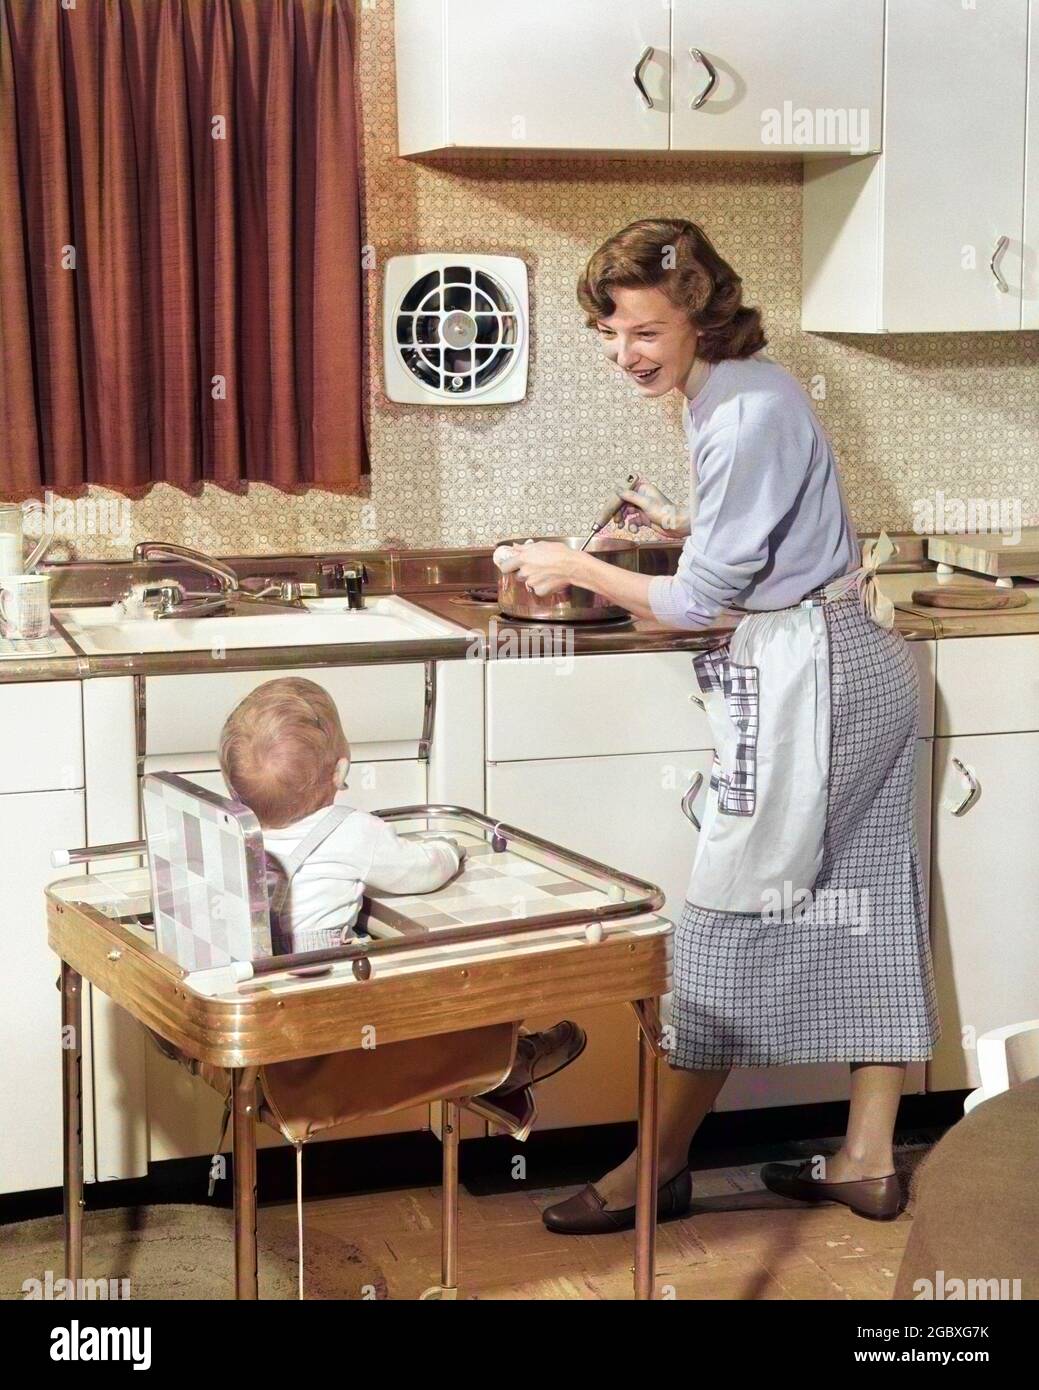 1950s WOMAN MOTHER IN HOME KITCHEN COOKING POT ON STOVE SMILING AT BABY CHILD IN HIGH CHAIR - h1665c HAR001 HARS TOGETHER INDOOR BABIES FURNITURE MOM STORY INDOORS POT STOVE NOSTALGIC COOK PAIR COLOR RELATIONSHIP MOTHERS CHEFS OLD TIME NOSTALGIA CHAIRS OLD FASHION 1 HOUSEHOLD JUVENILE YOUNG ADULT INFANT SONS LIFESTYLE PARENTING FEMALES RELATION GROWNUP HEALTHINESS HOME LIFE PREPARING COPY SPACE FRIENDSHIP FULL-LENGTH HALF-LENGTH LADIES DAUGHTERS PERSONS GROWN-UP CARING MALES INGREDIENTS UTENSILS SINGLE PARENT HOMEMAKER SINGLE PARENTS PEOPLE STORY MATERNAL HAPPINESS HIGHCHAIR HOMEMAKERS NOURISH Stock Photo